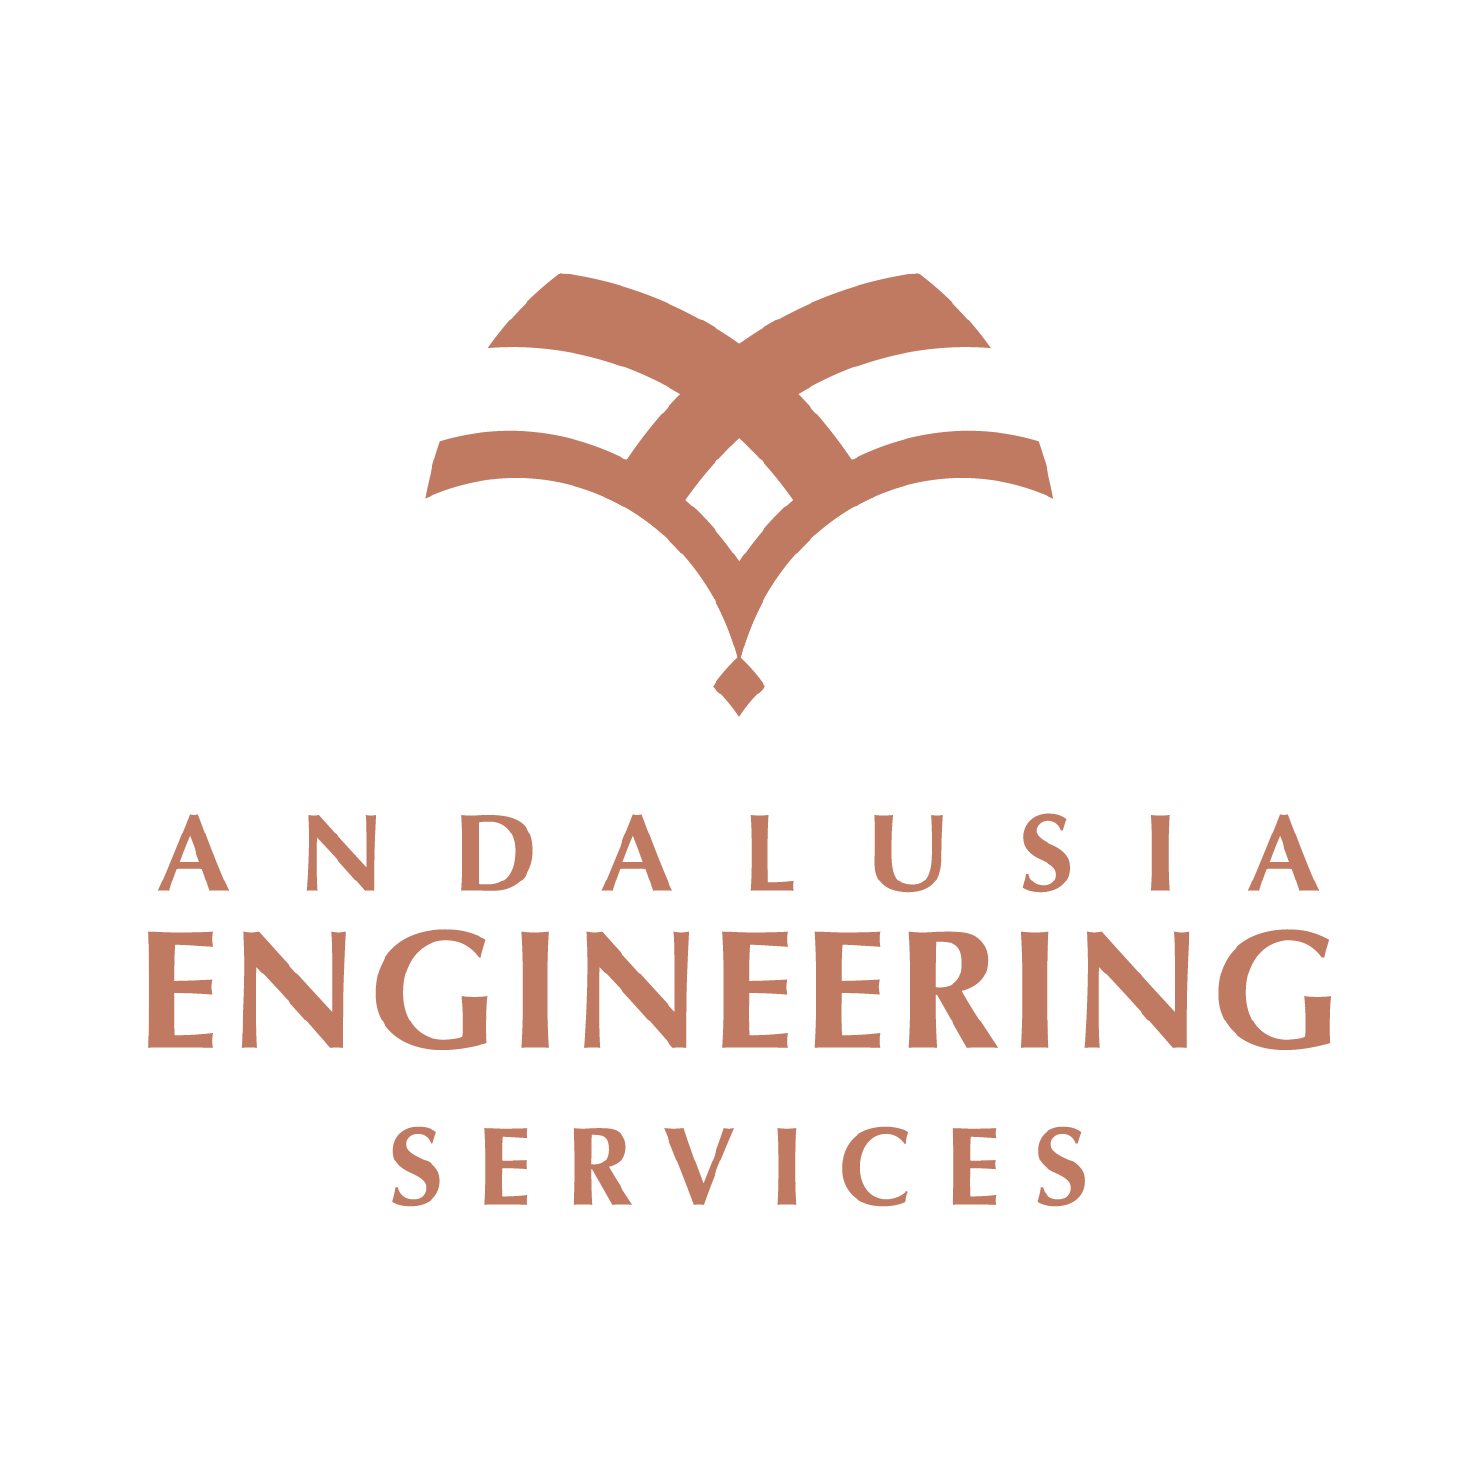 A.E.S Andalusia Engineering Services